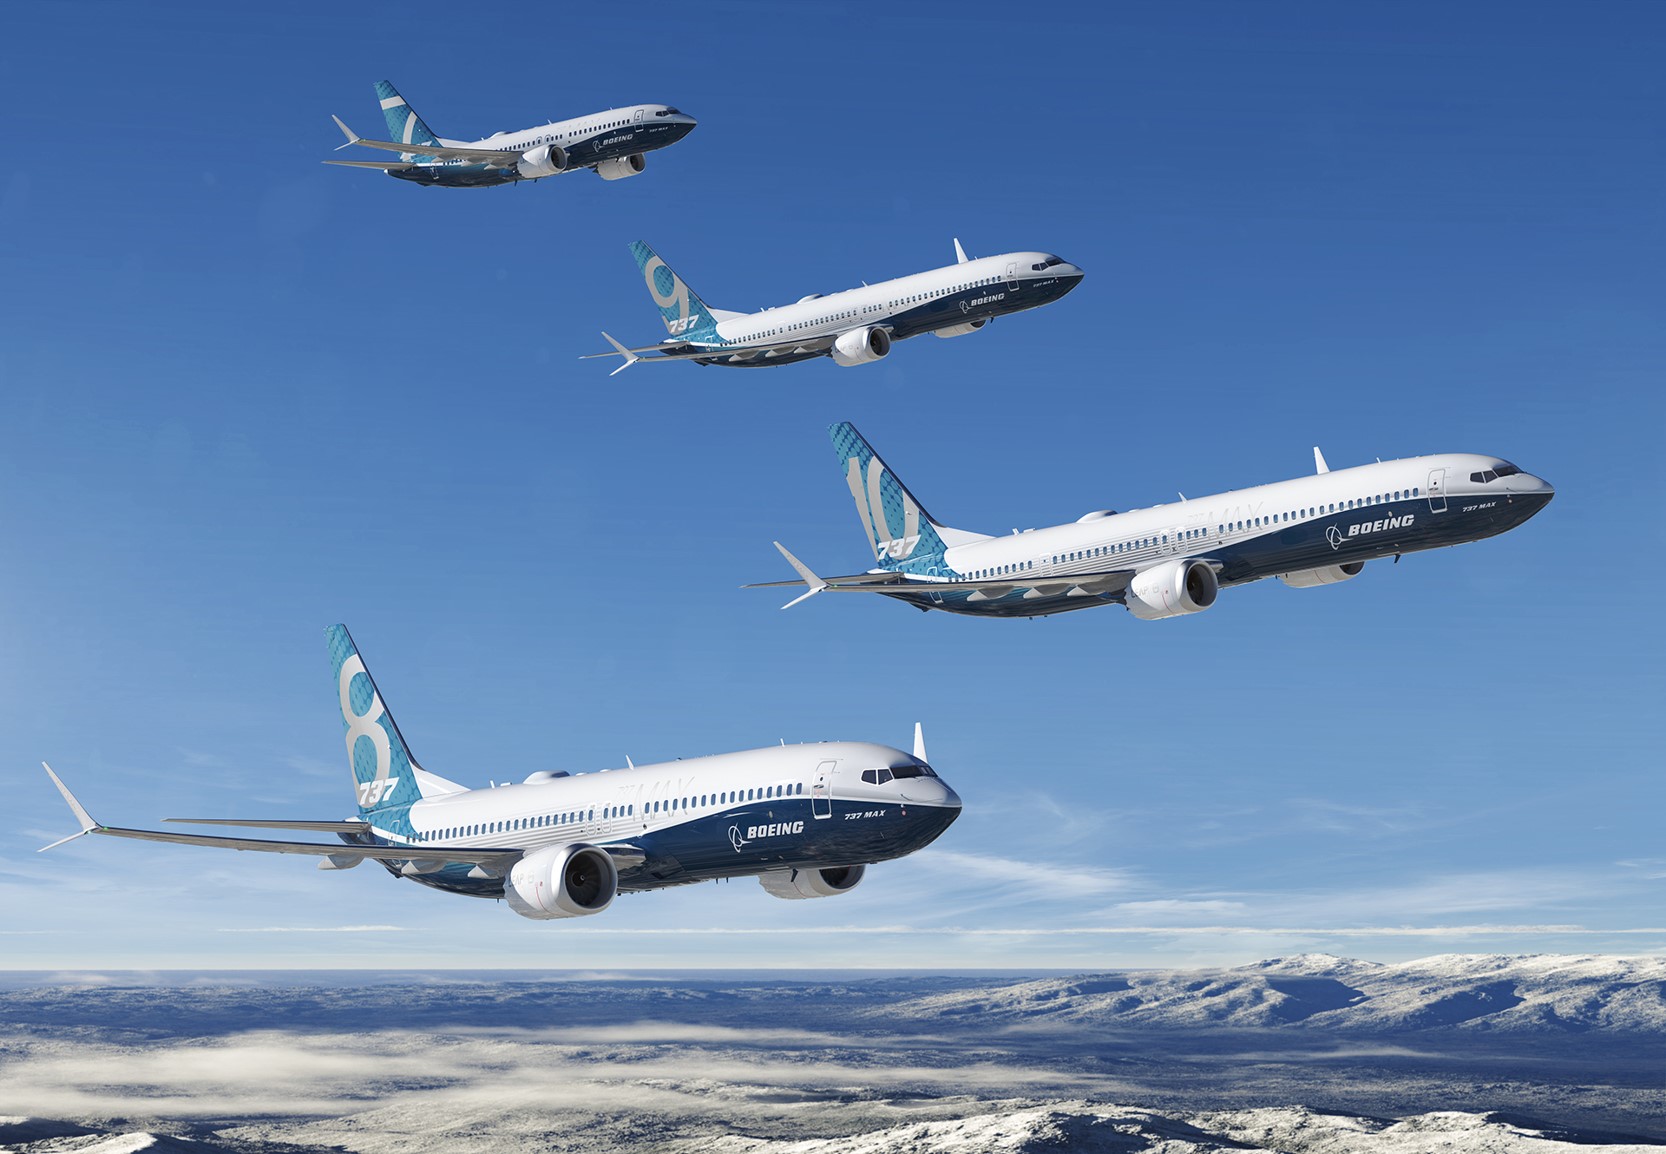 777 Partners orders 30 additional 737 MAXs